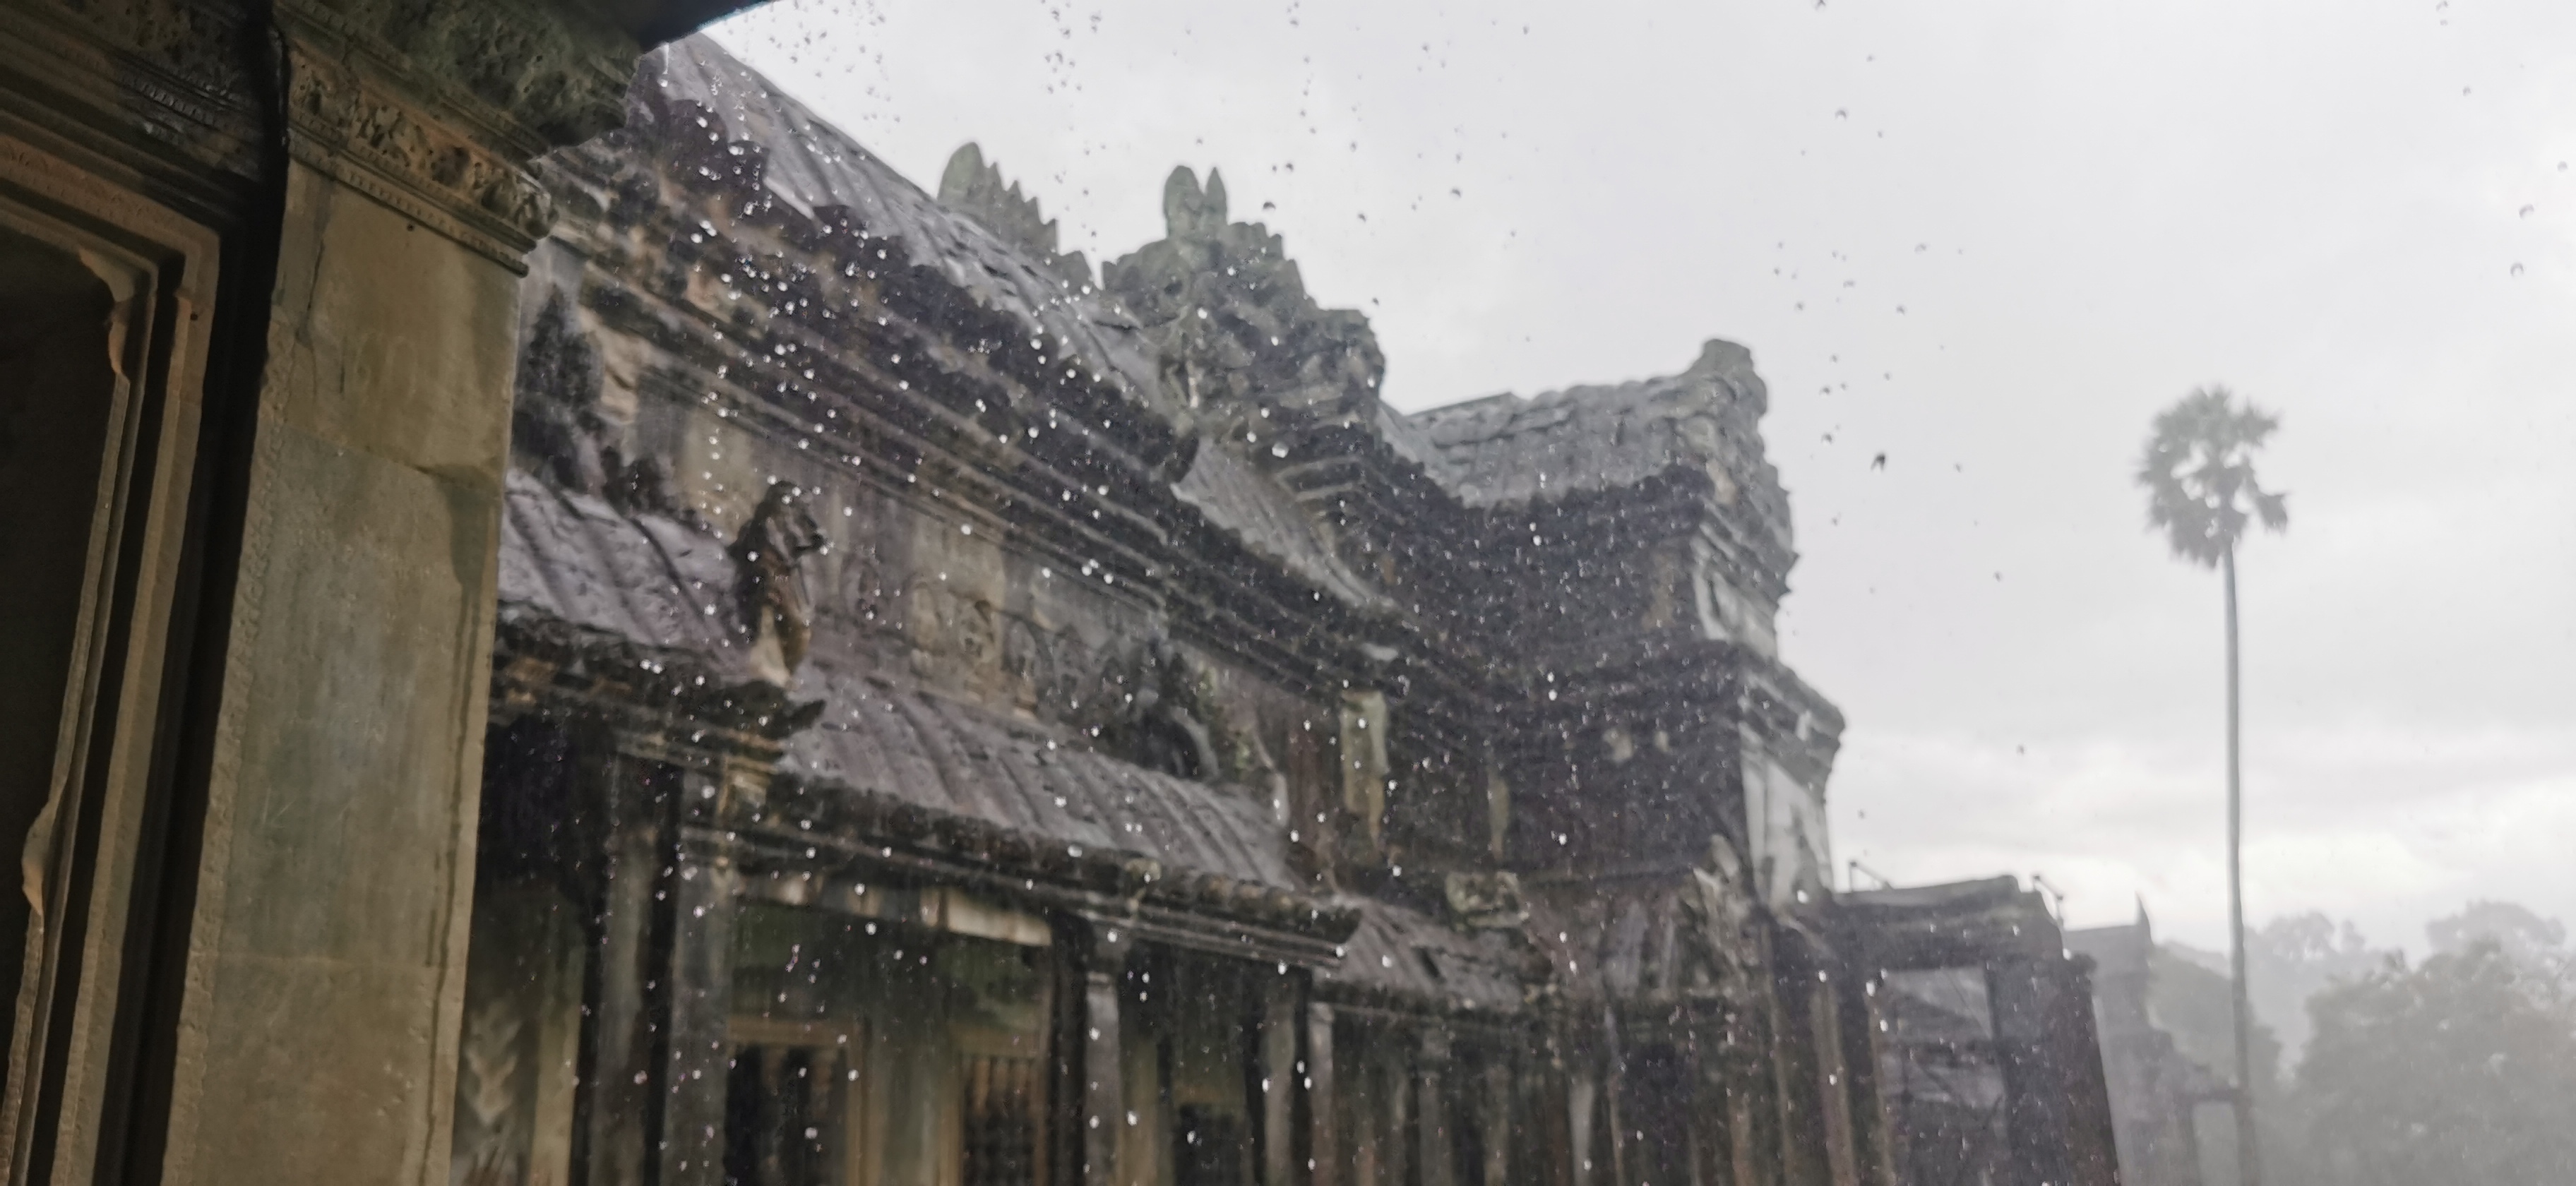 A view of the Angkor Archaeological Park on a rainy day in Cambodia. /CGTN